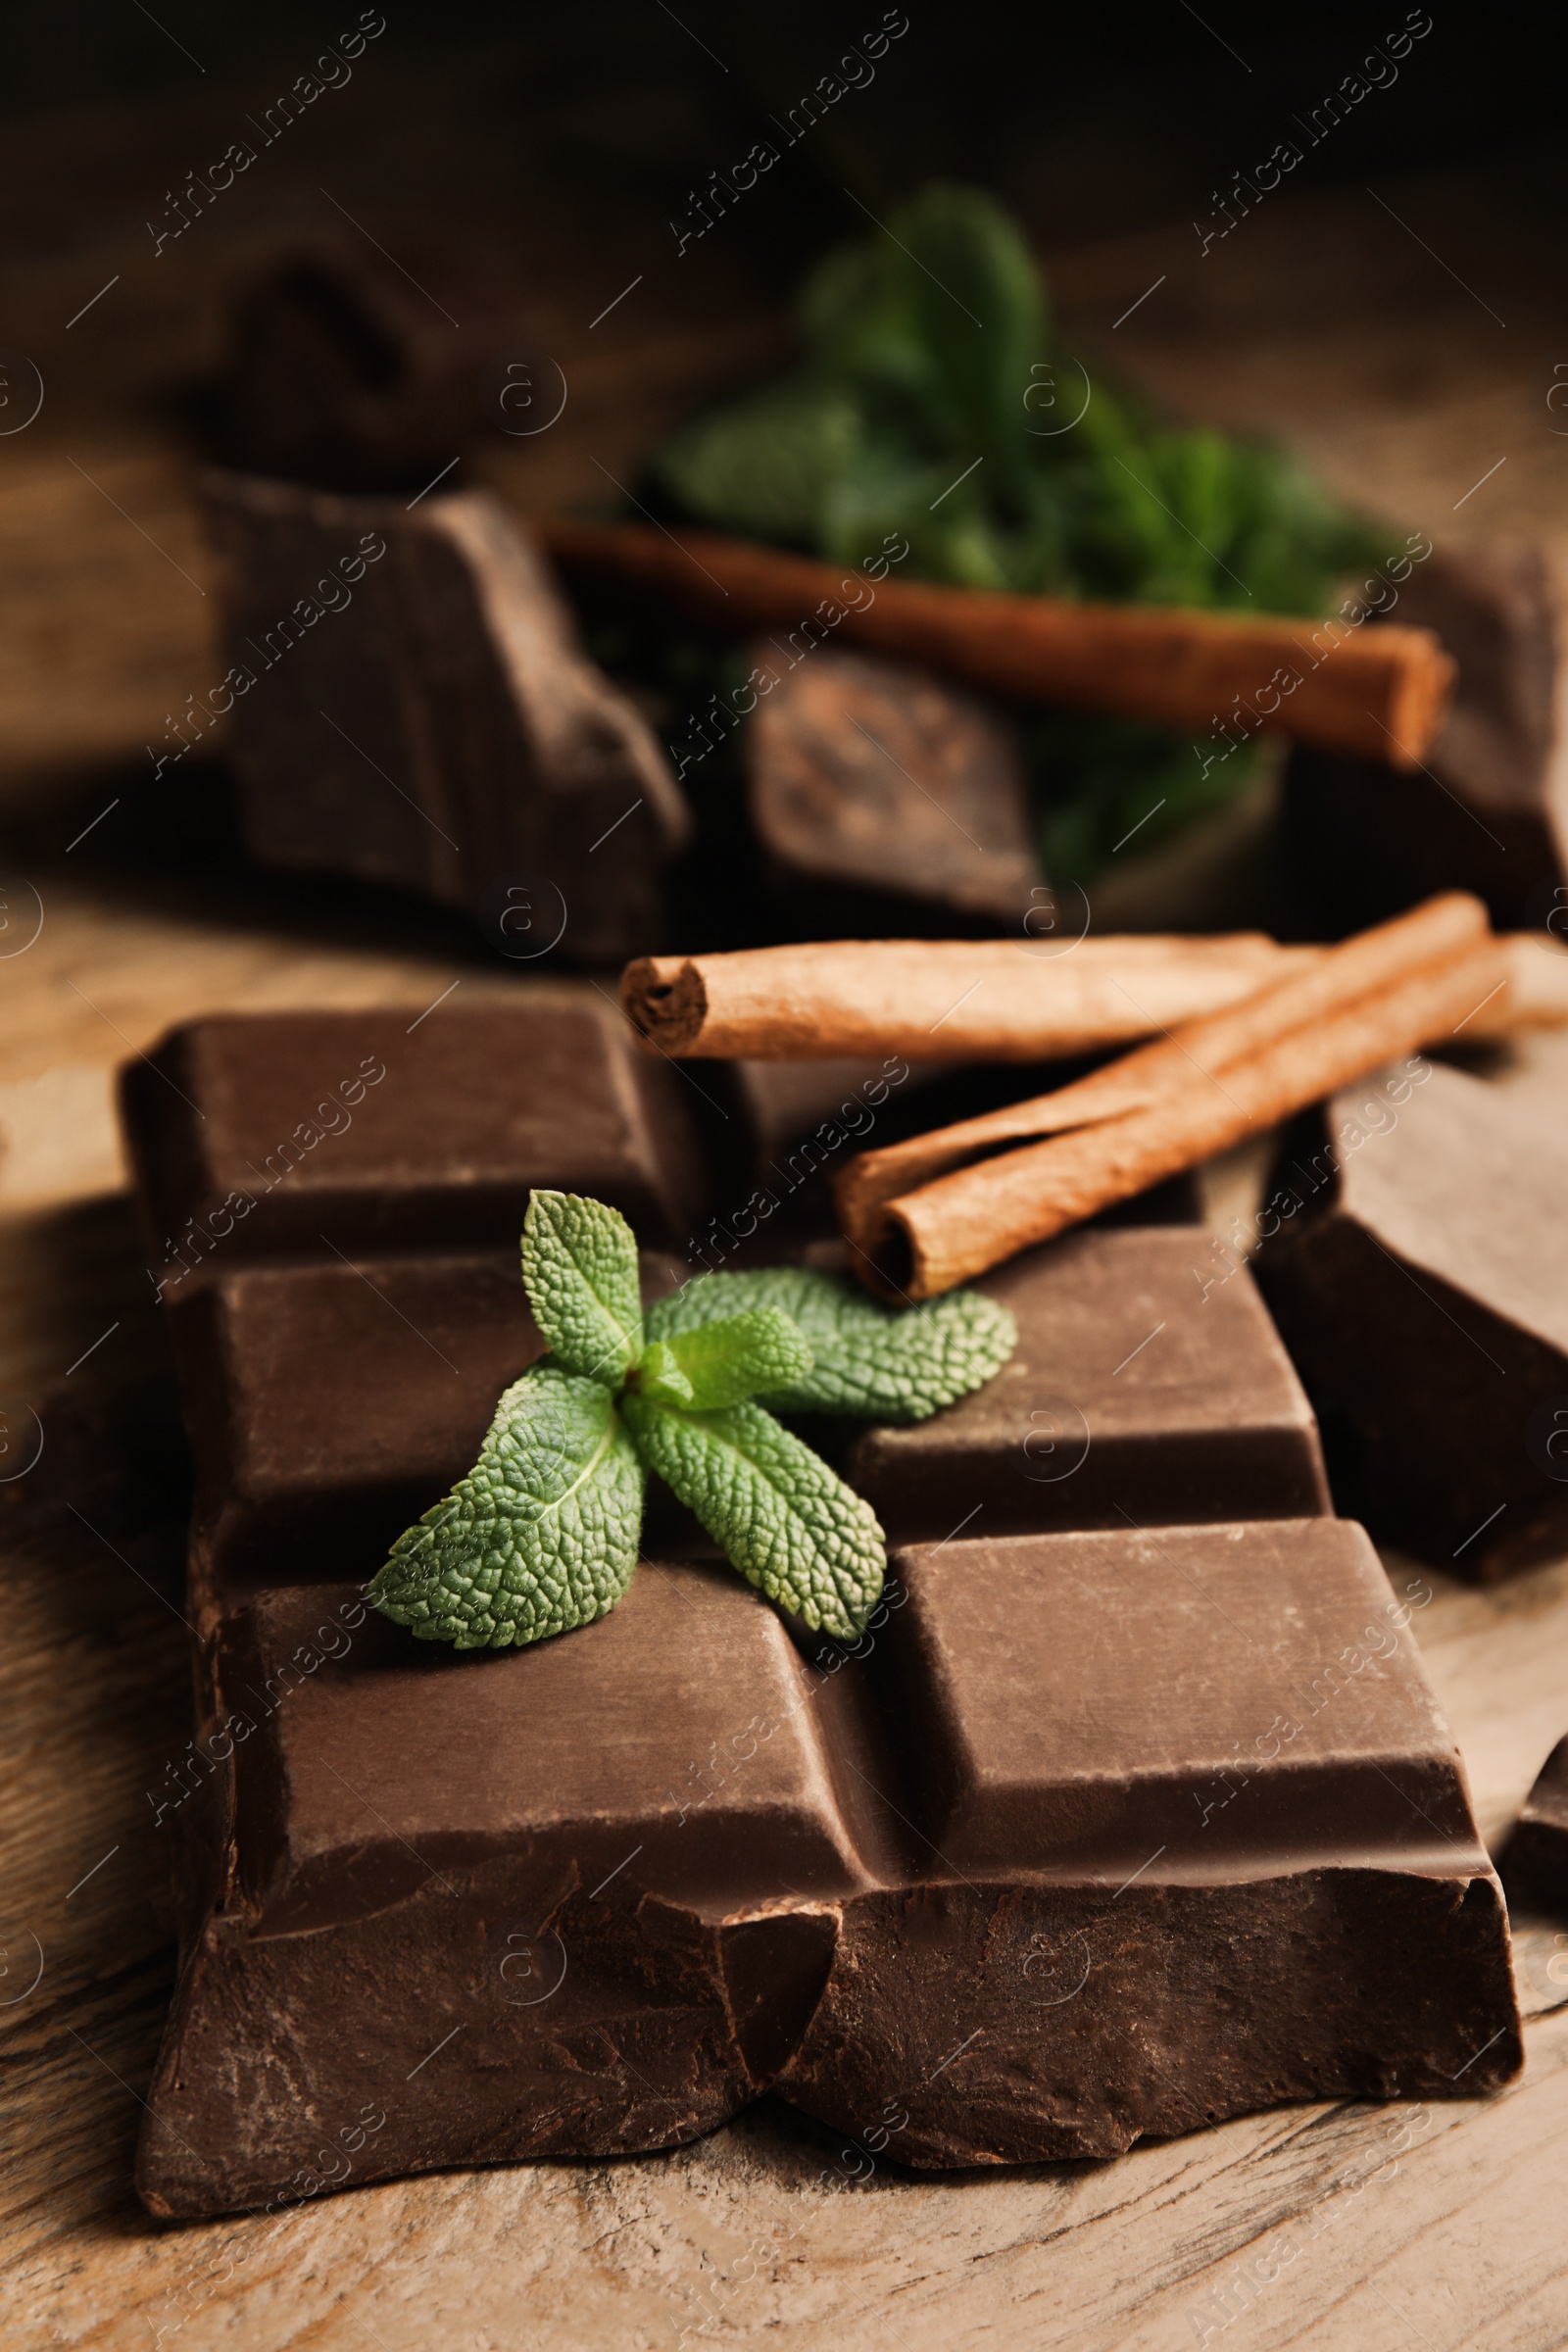 Photo of Tasty chocolate pieces, cinnamon sticks and mint on wooden table, closeup